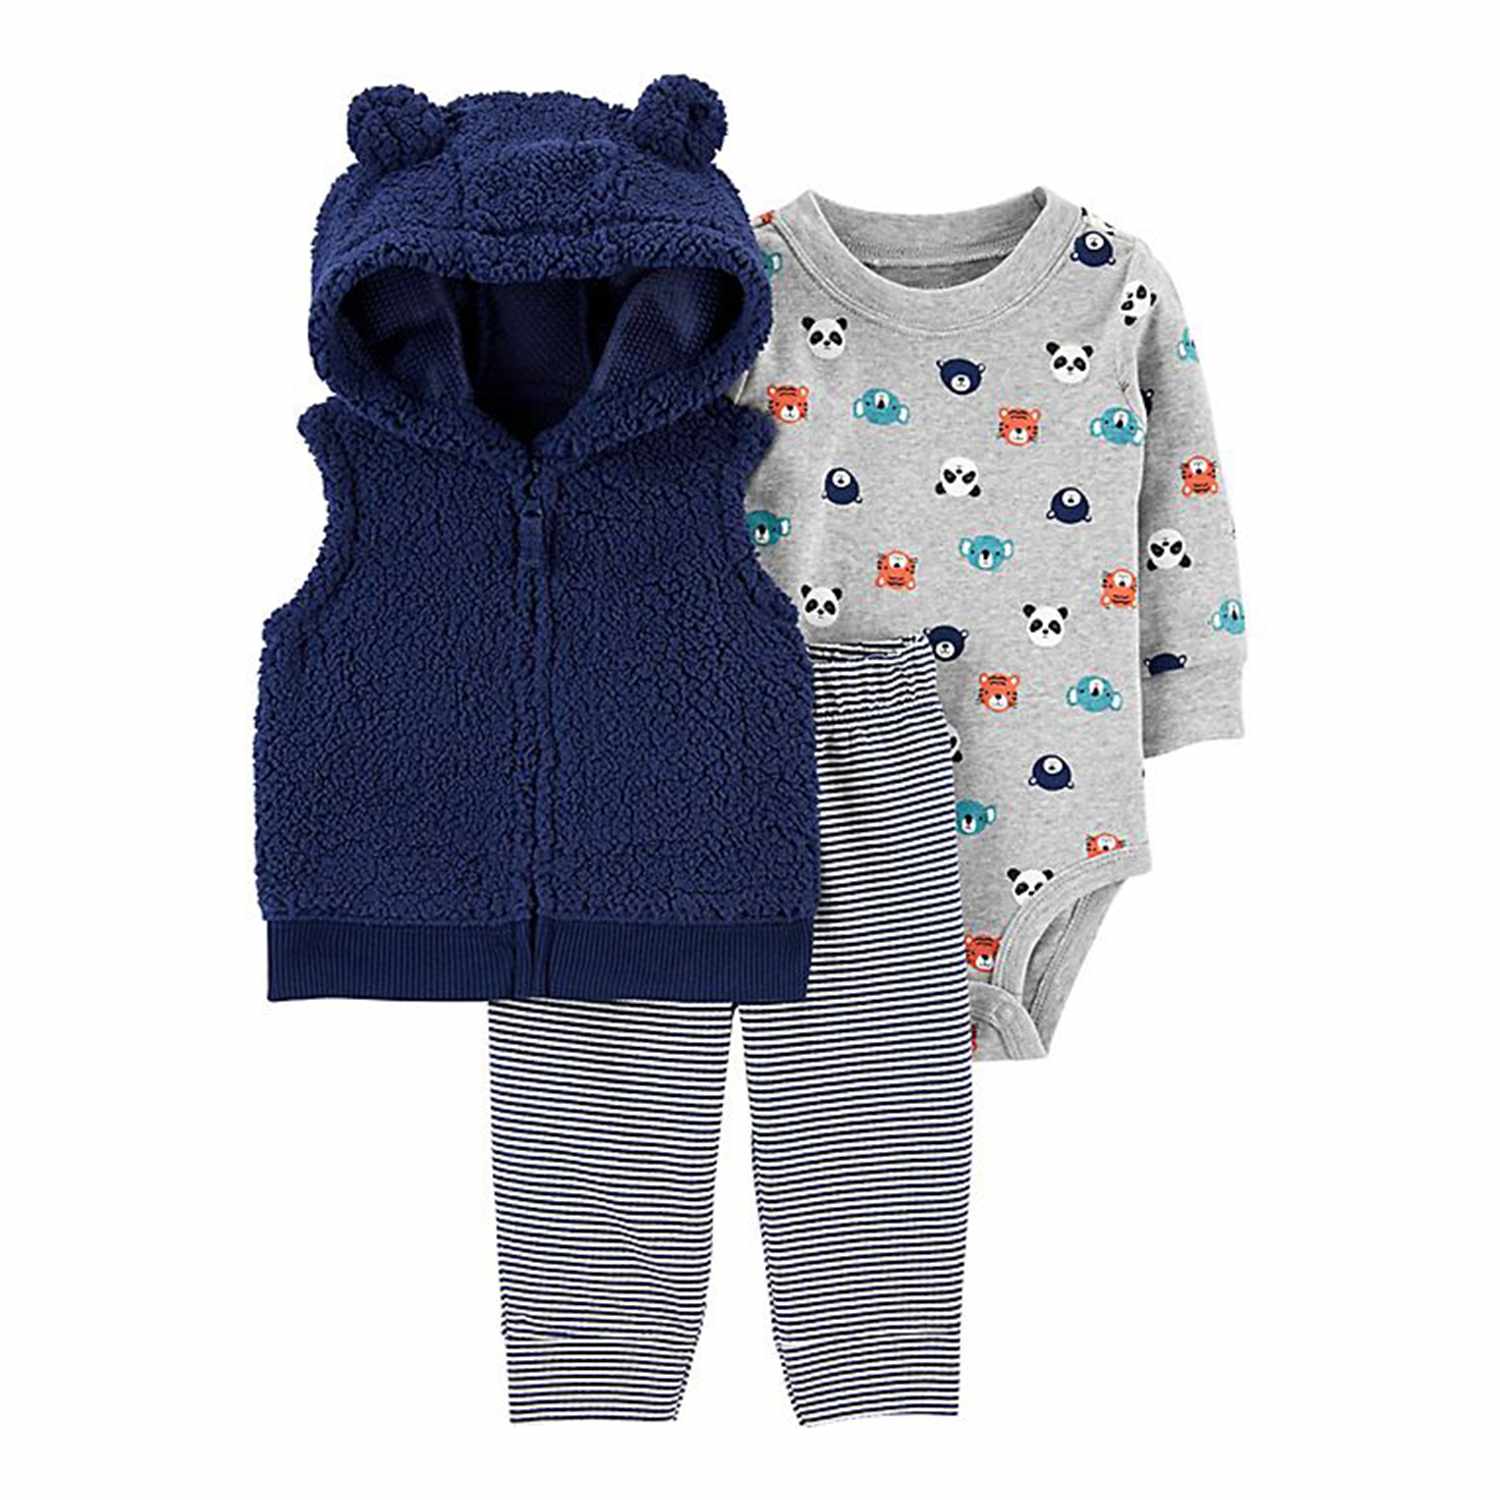 carter's® 3-Piece Sherpa Little Vest, Long Sleeve Bodysuit, and Pant Set in Navy